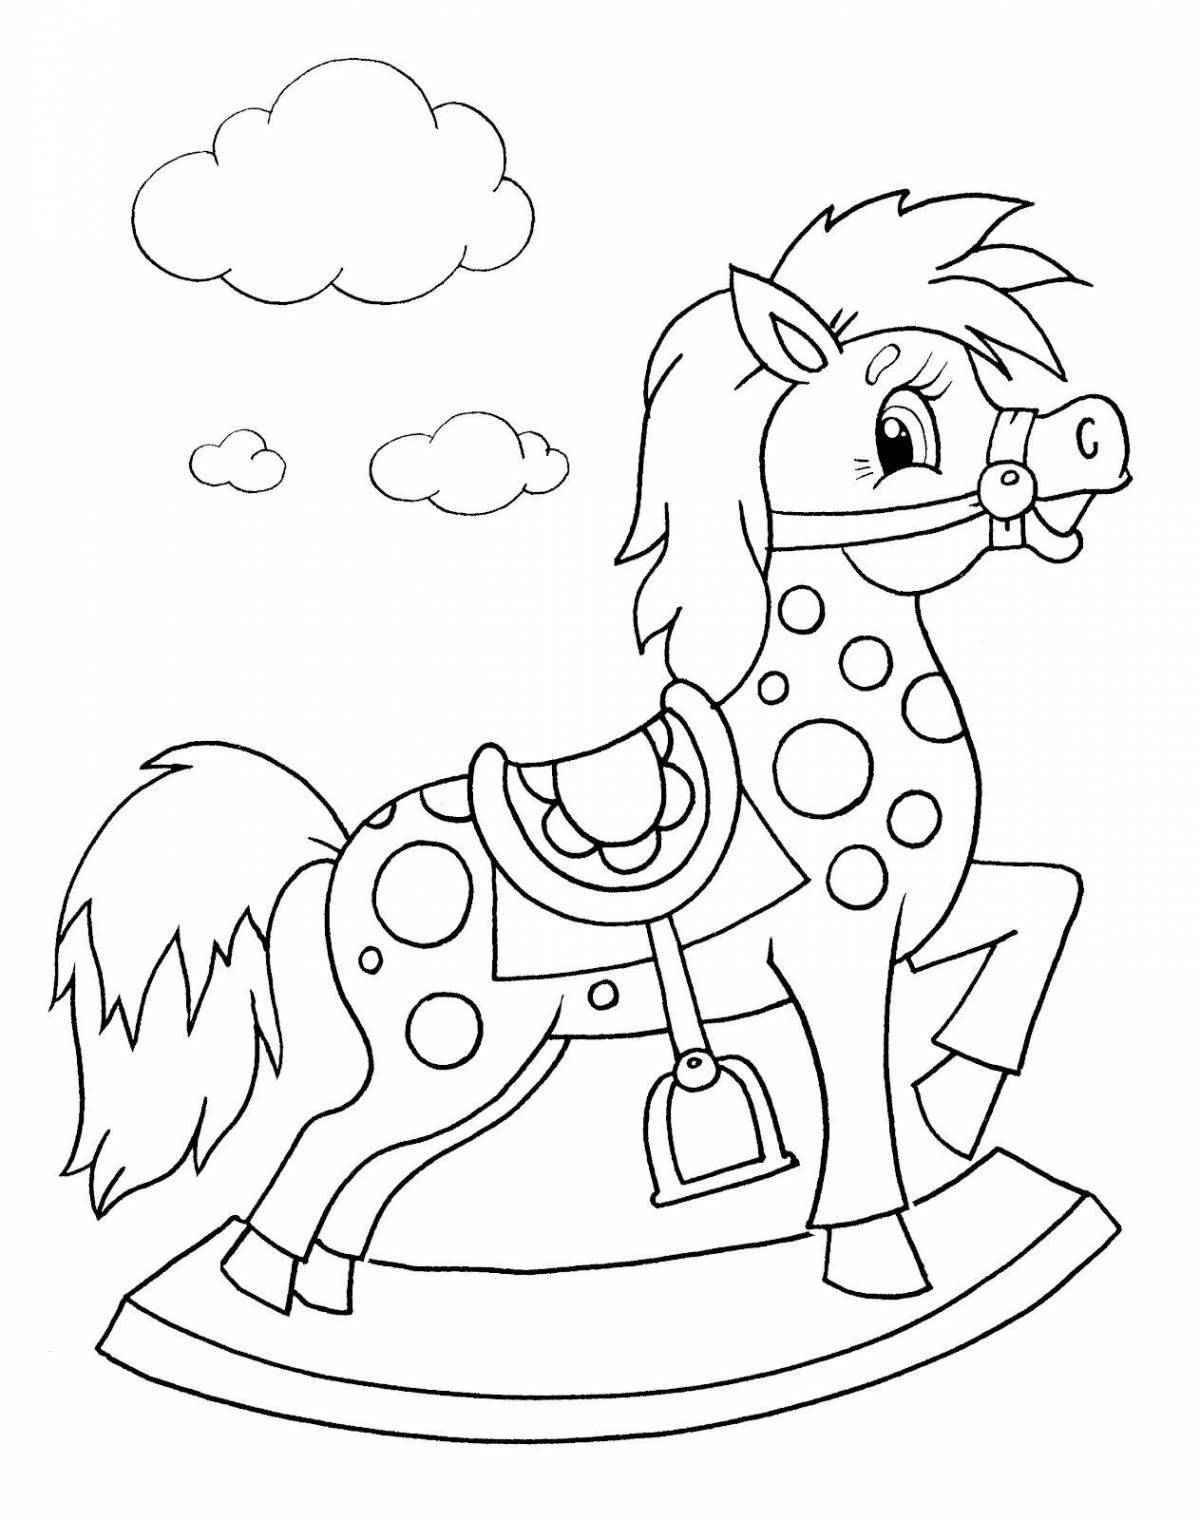 Fun drawing of a horse for kids